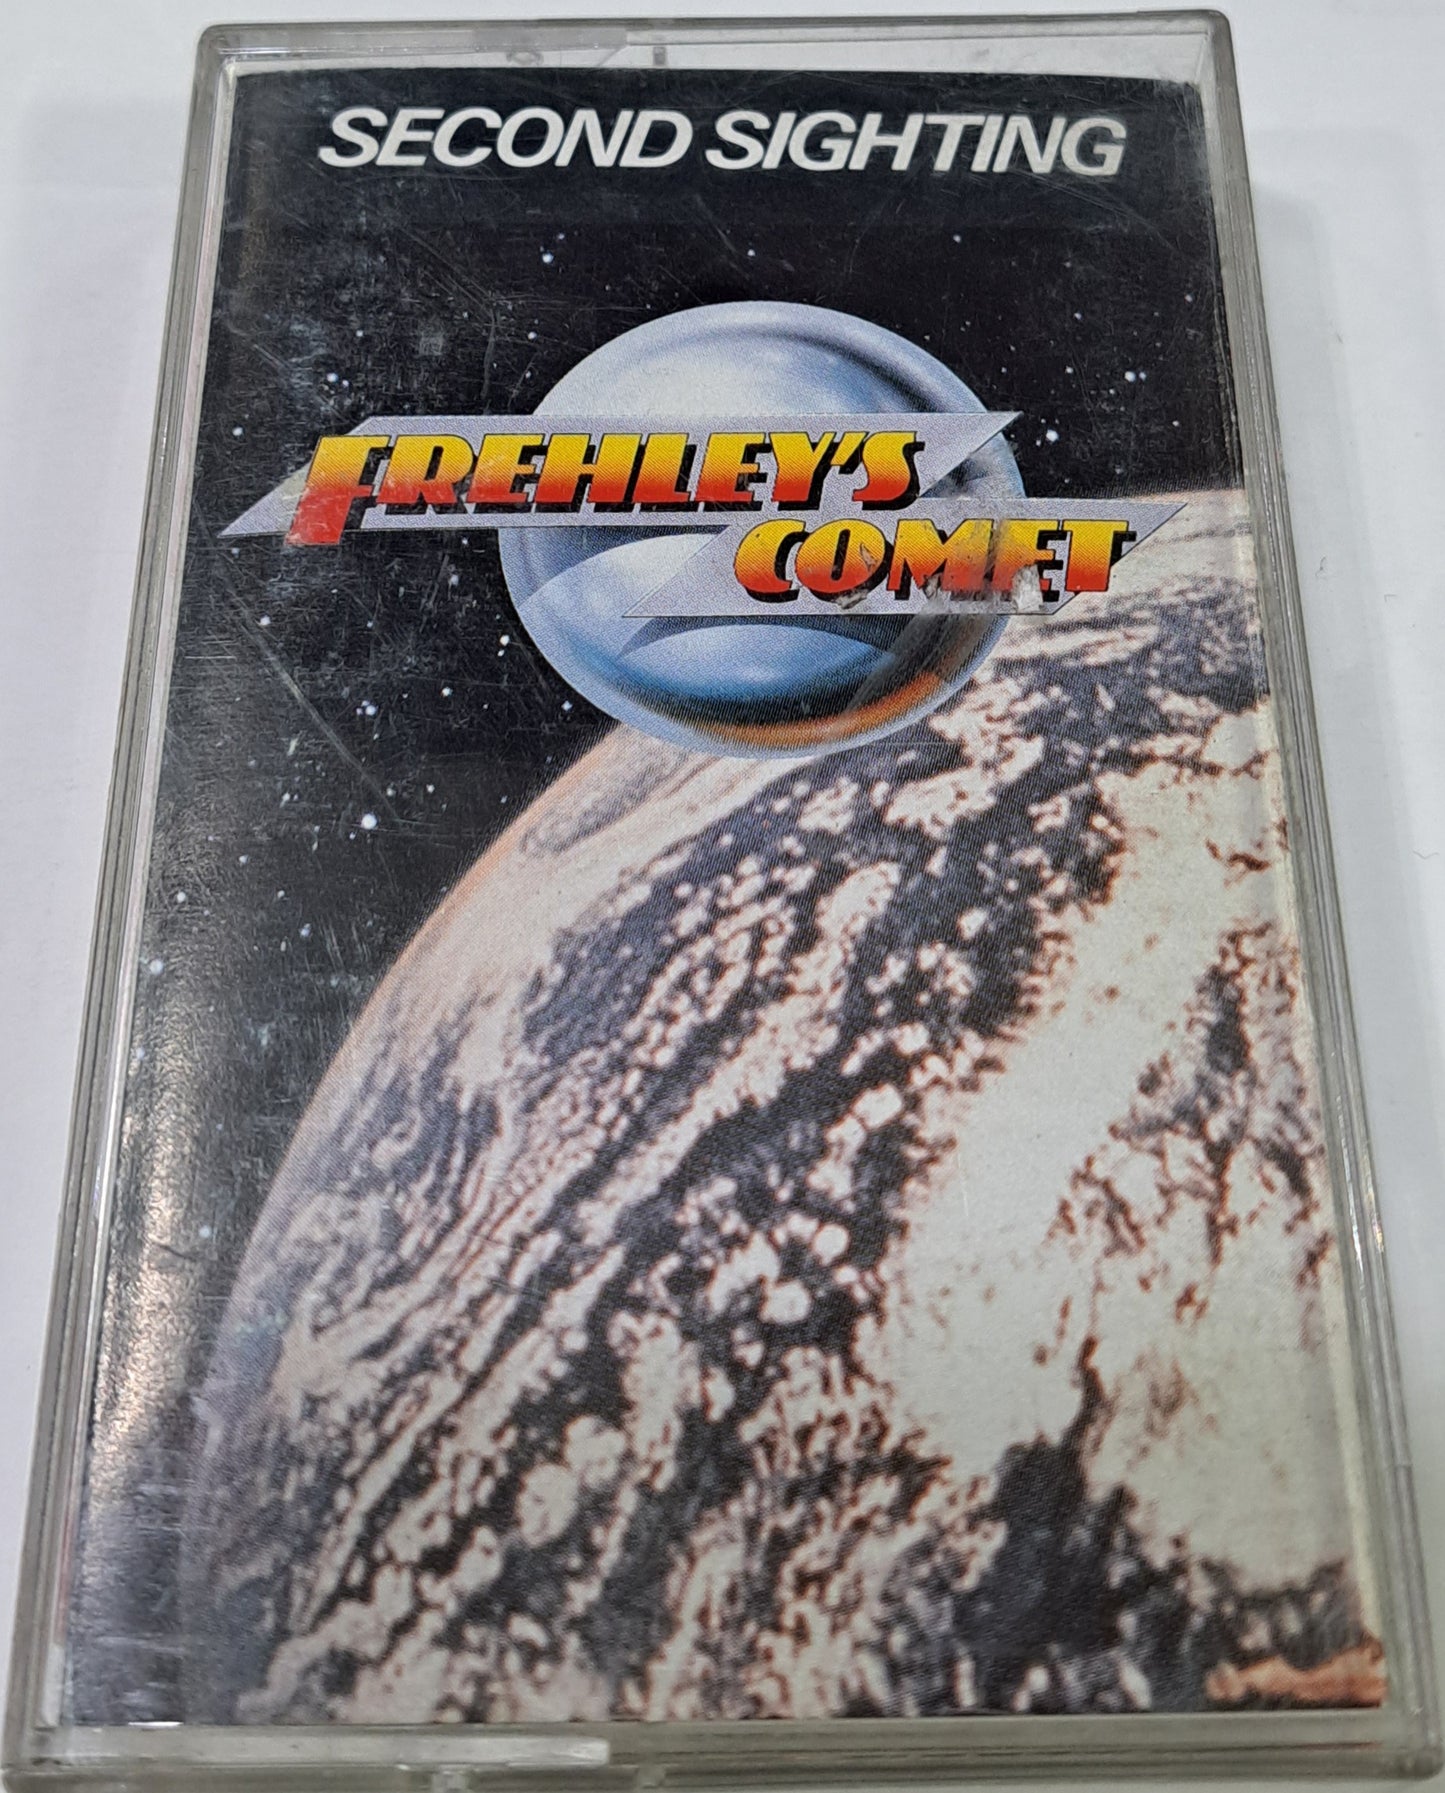 FREHLEY S COMET - SECOND SIGHTING CASSETTE